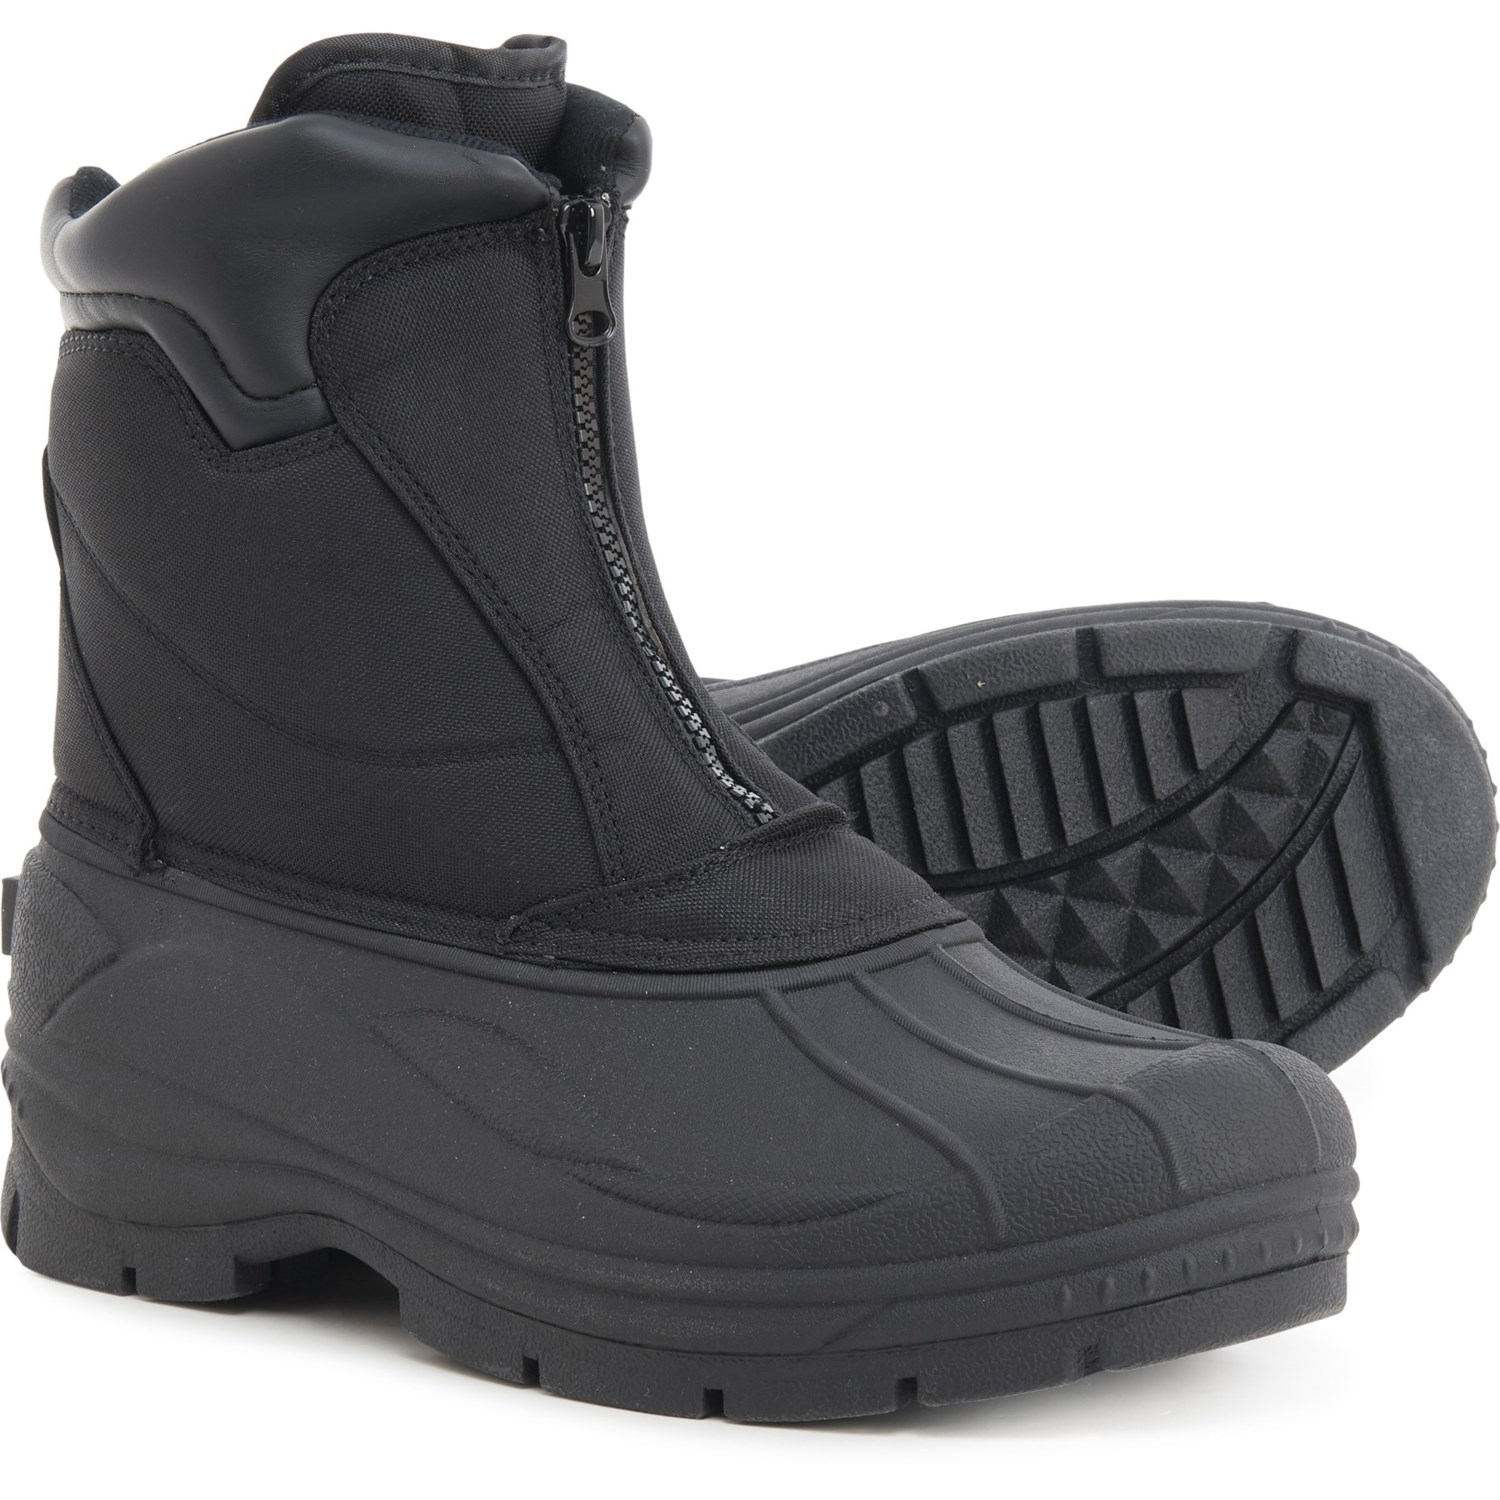 Weatherproof Cassel Pac Boots (For Men) - Save 55%